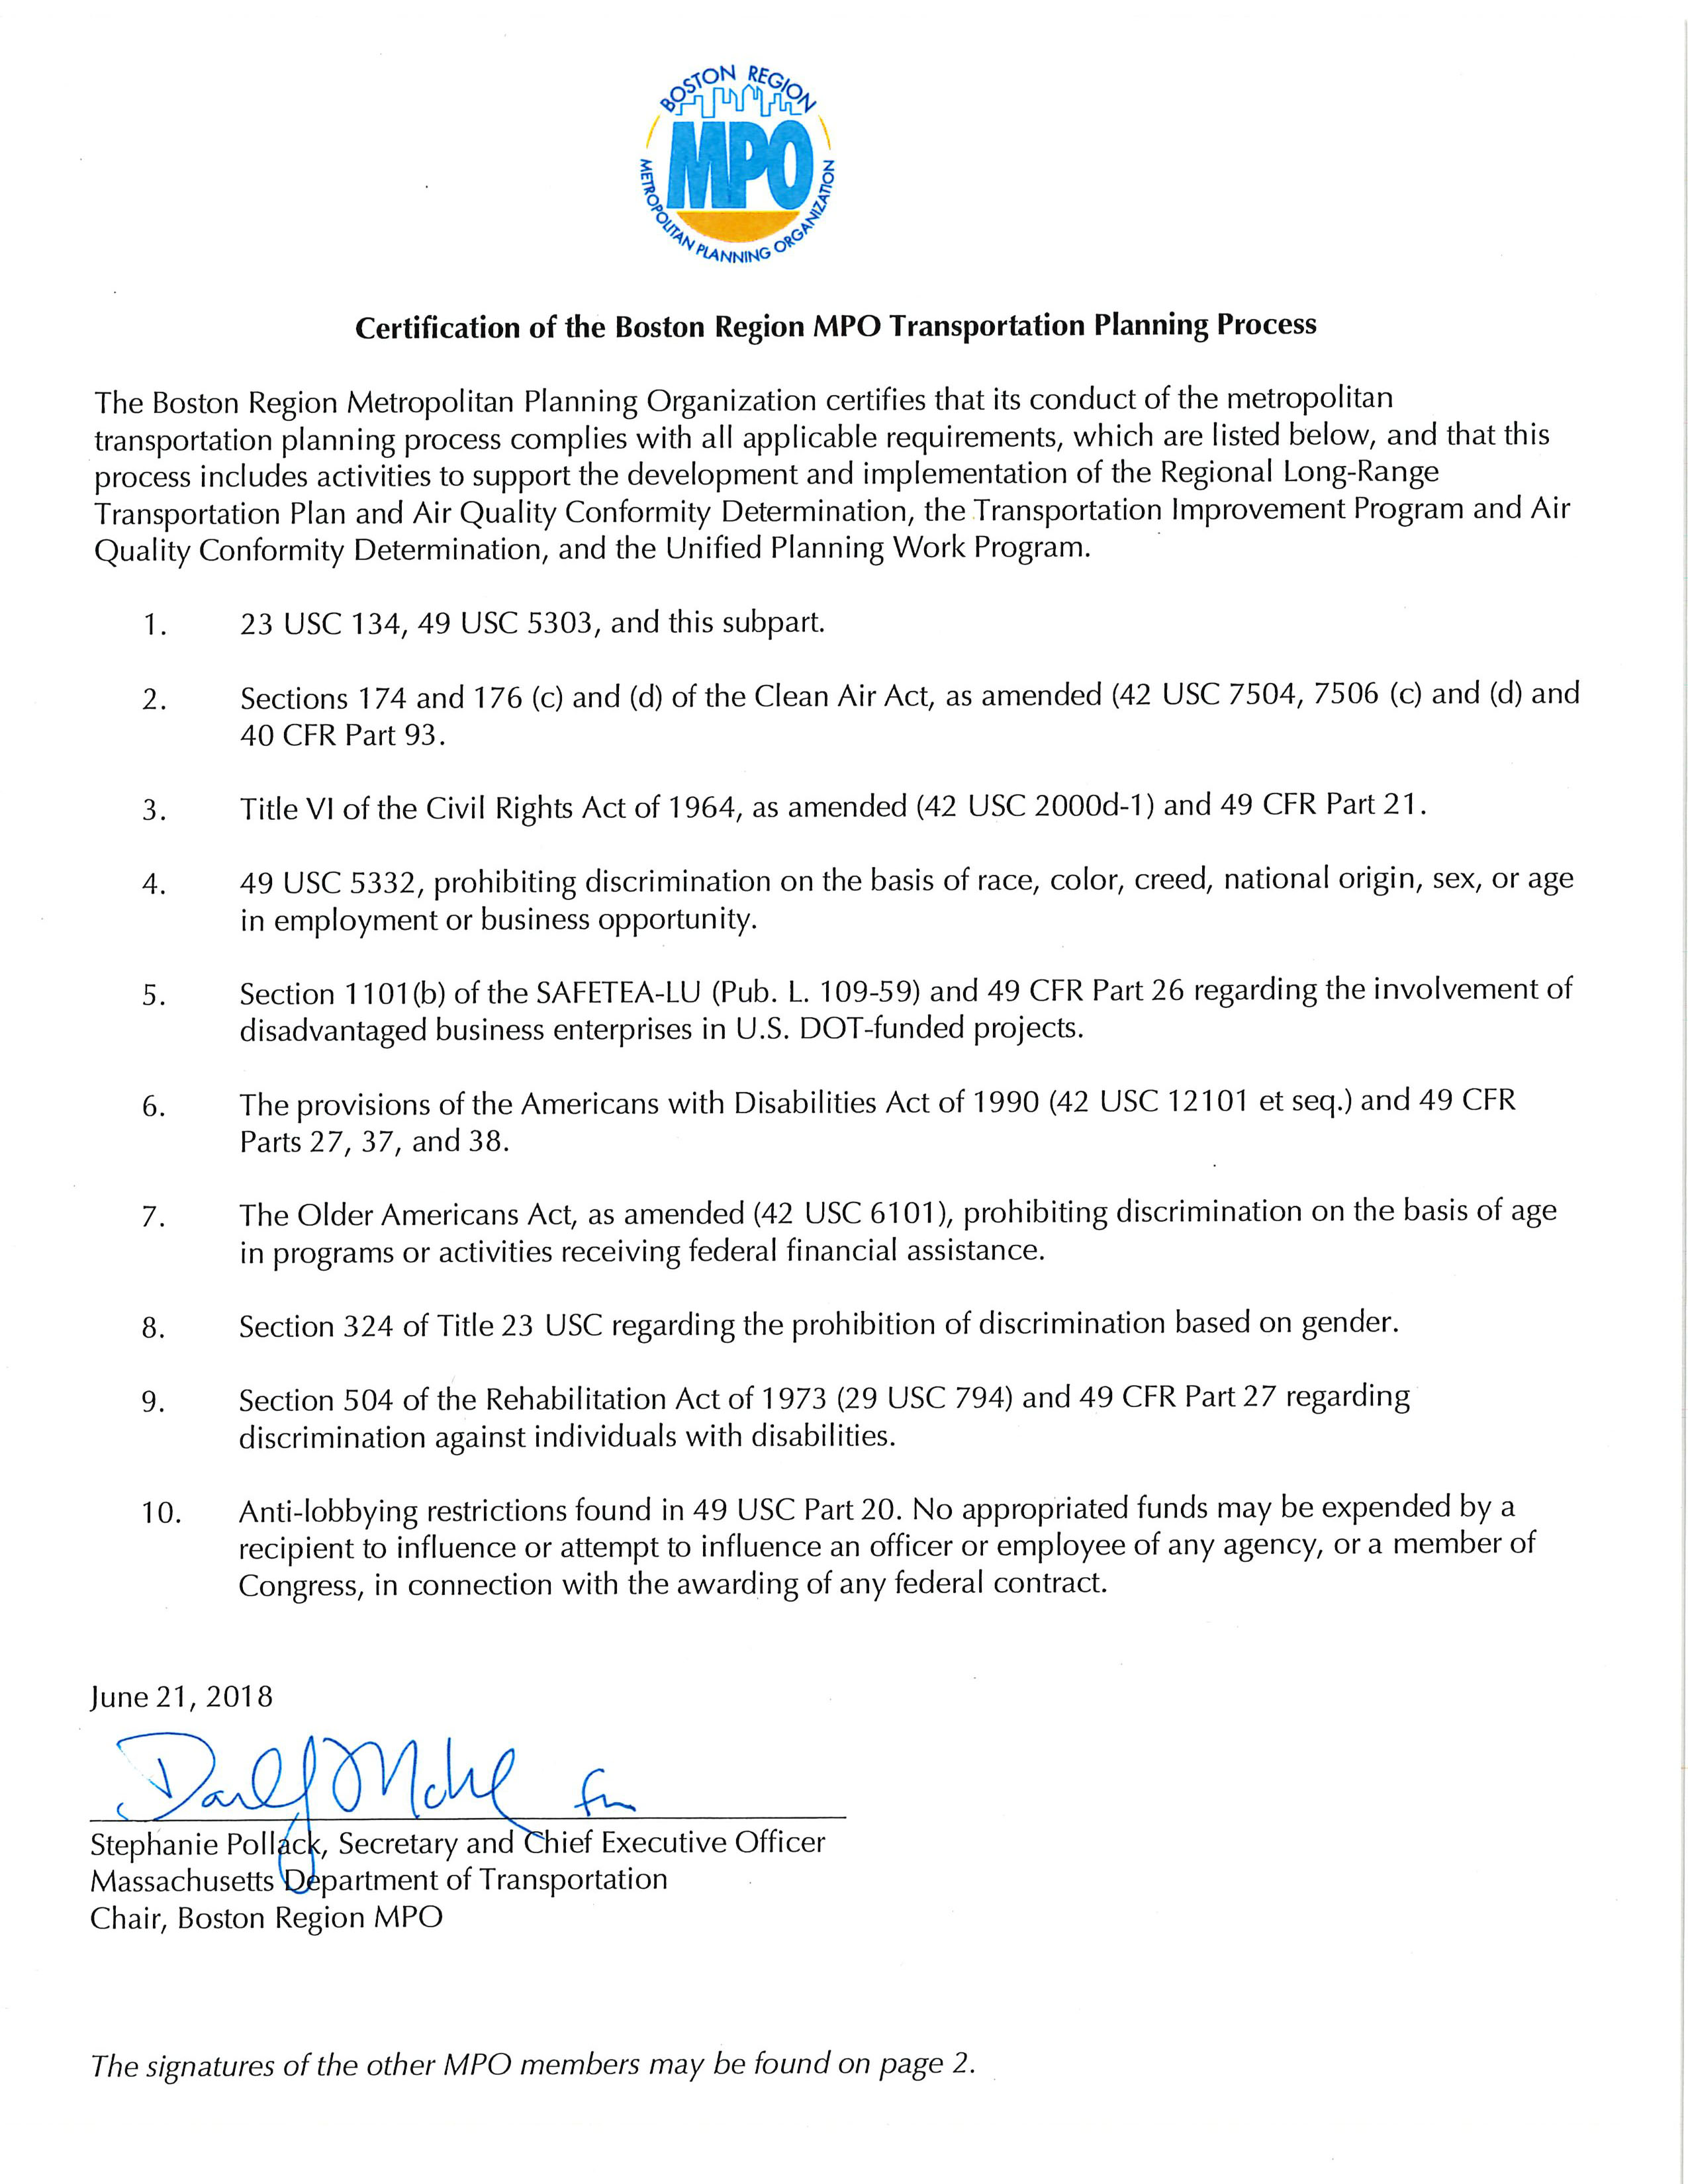 Page 1 of 2. These pages are the self-certification statement of the Boston Region MPO. The MPO certifies that its conduct of the metropolitan transportation planning process complies with all applicable requirements, and that this process includes activities to support the development and implementation of the Regional Long-Range Transportation Plan and Air Quality Conformity Determination (LRTP), the Transportation Improvement Program and Air Quality Conformity Determination (TIP), and the Unified Planning Work Program (UPWP). These pages were signed on June 21, 2018 by the members of the MPO or their representatives.